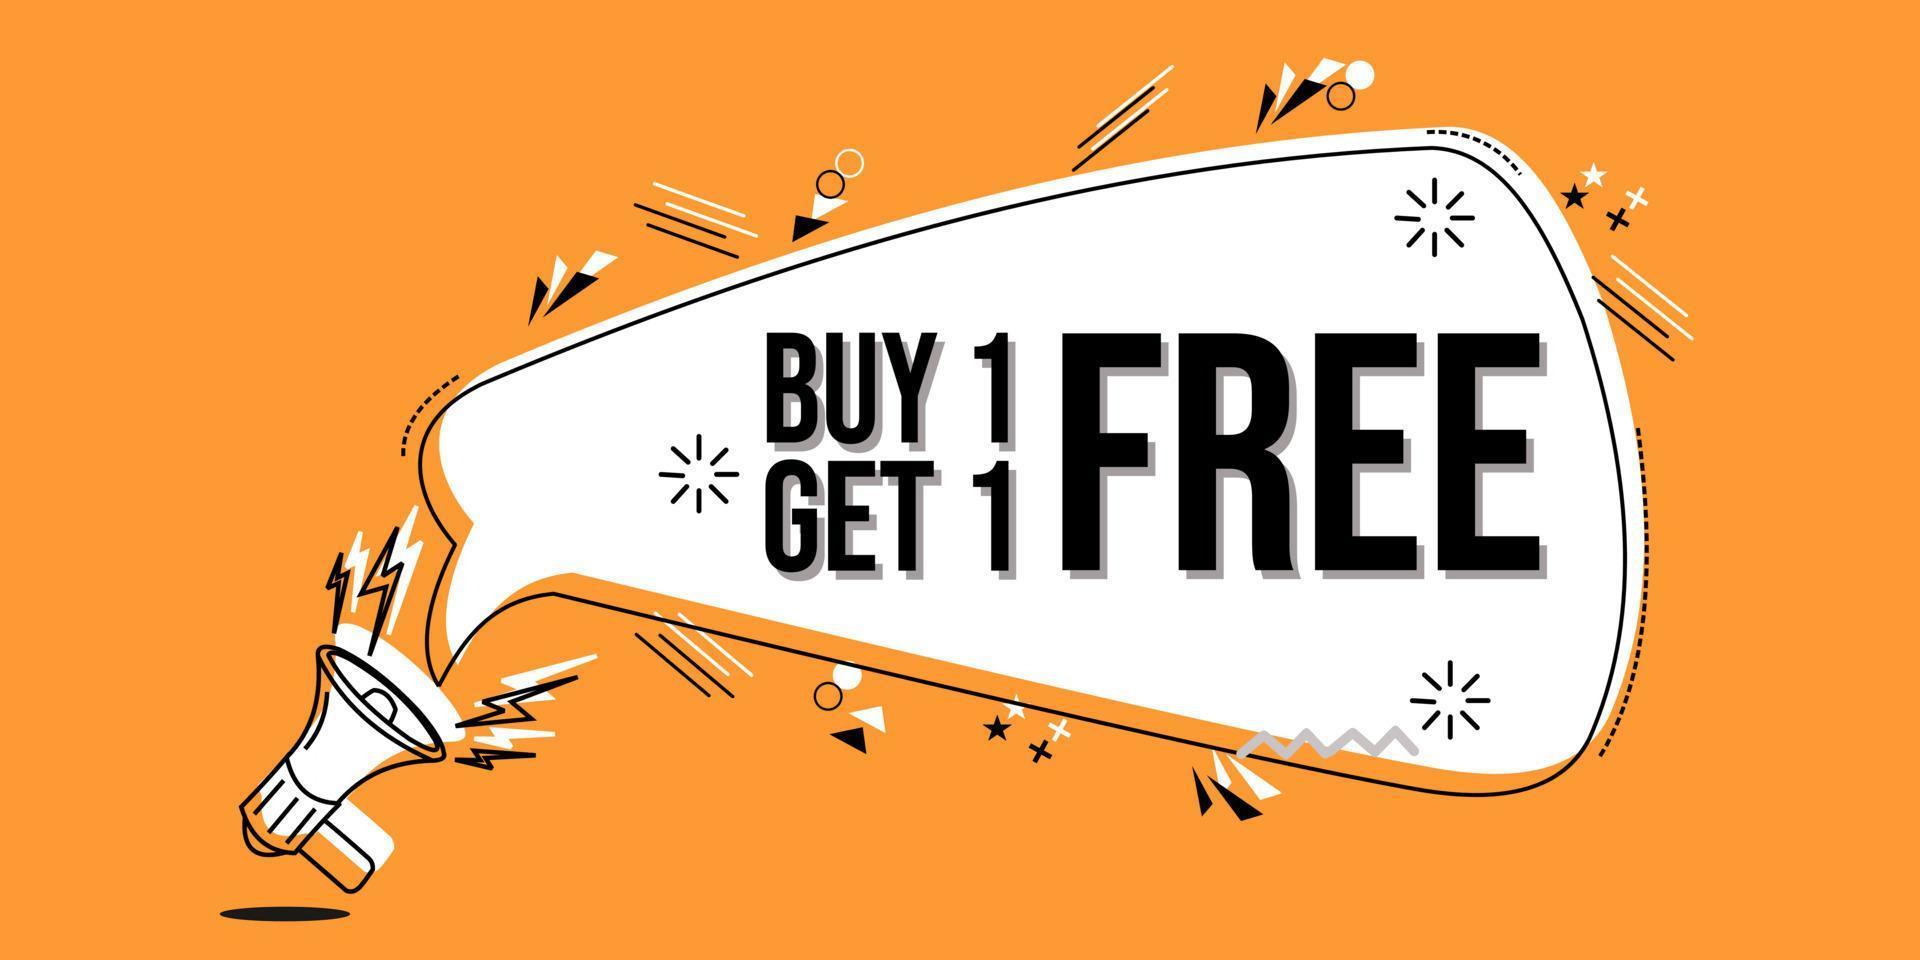 speech bubble ad banner with text buy one get one free. orange color comic background vector